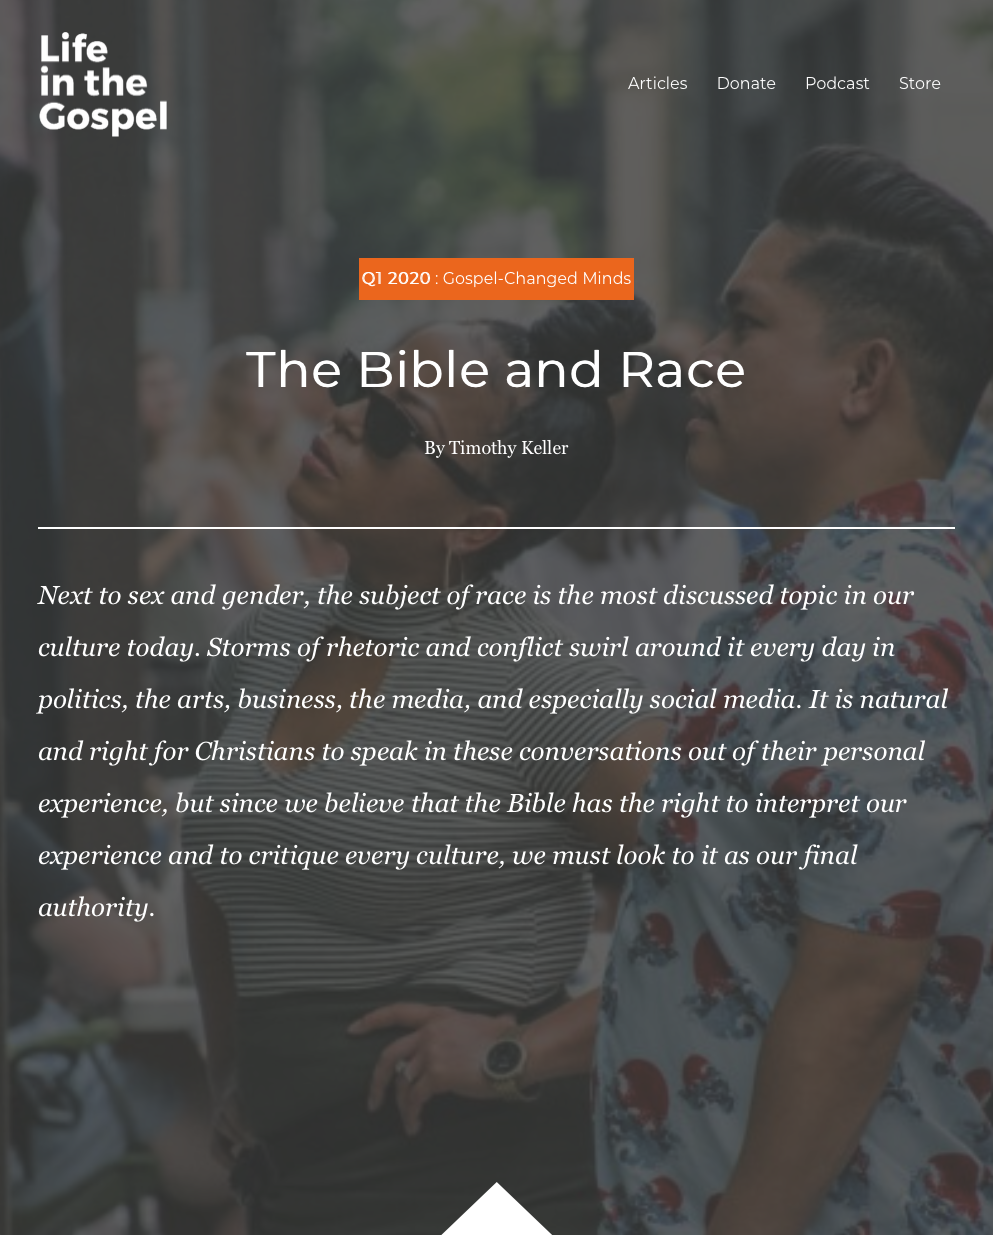 The Bible and Race by Timothy Keller